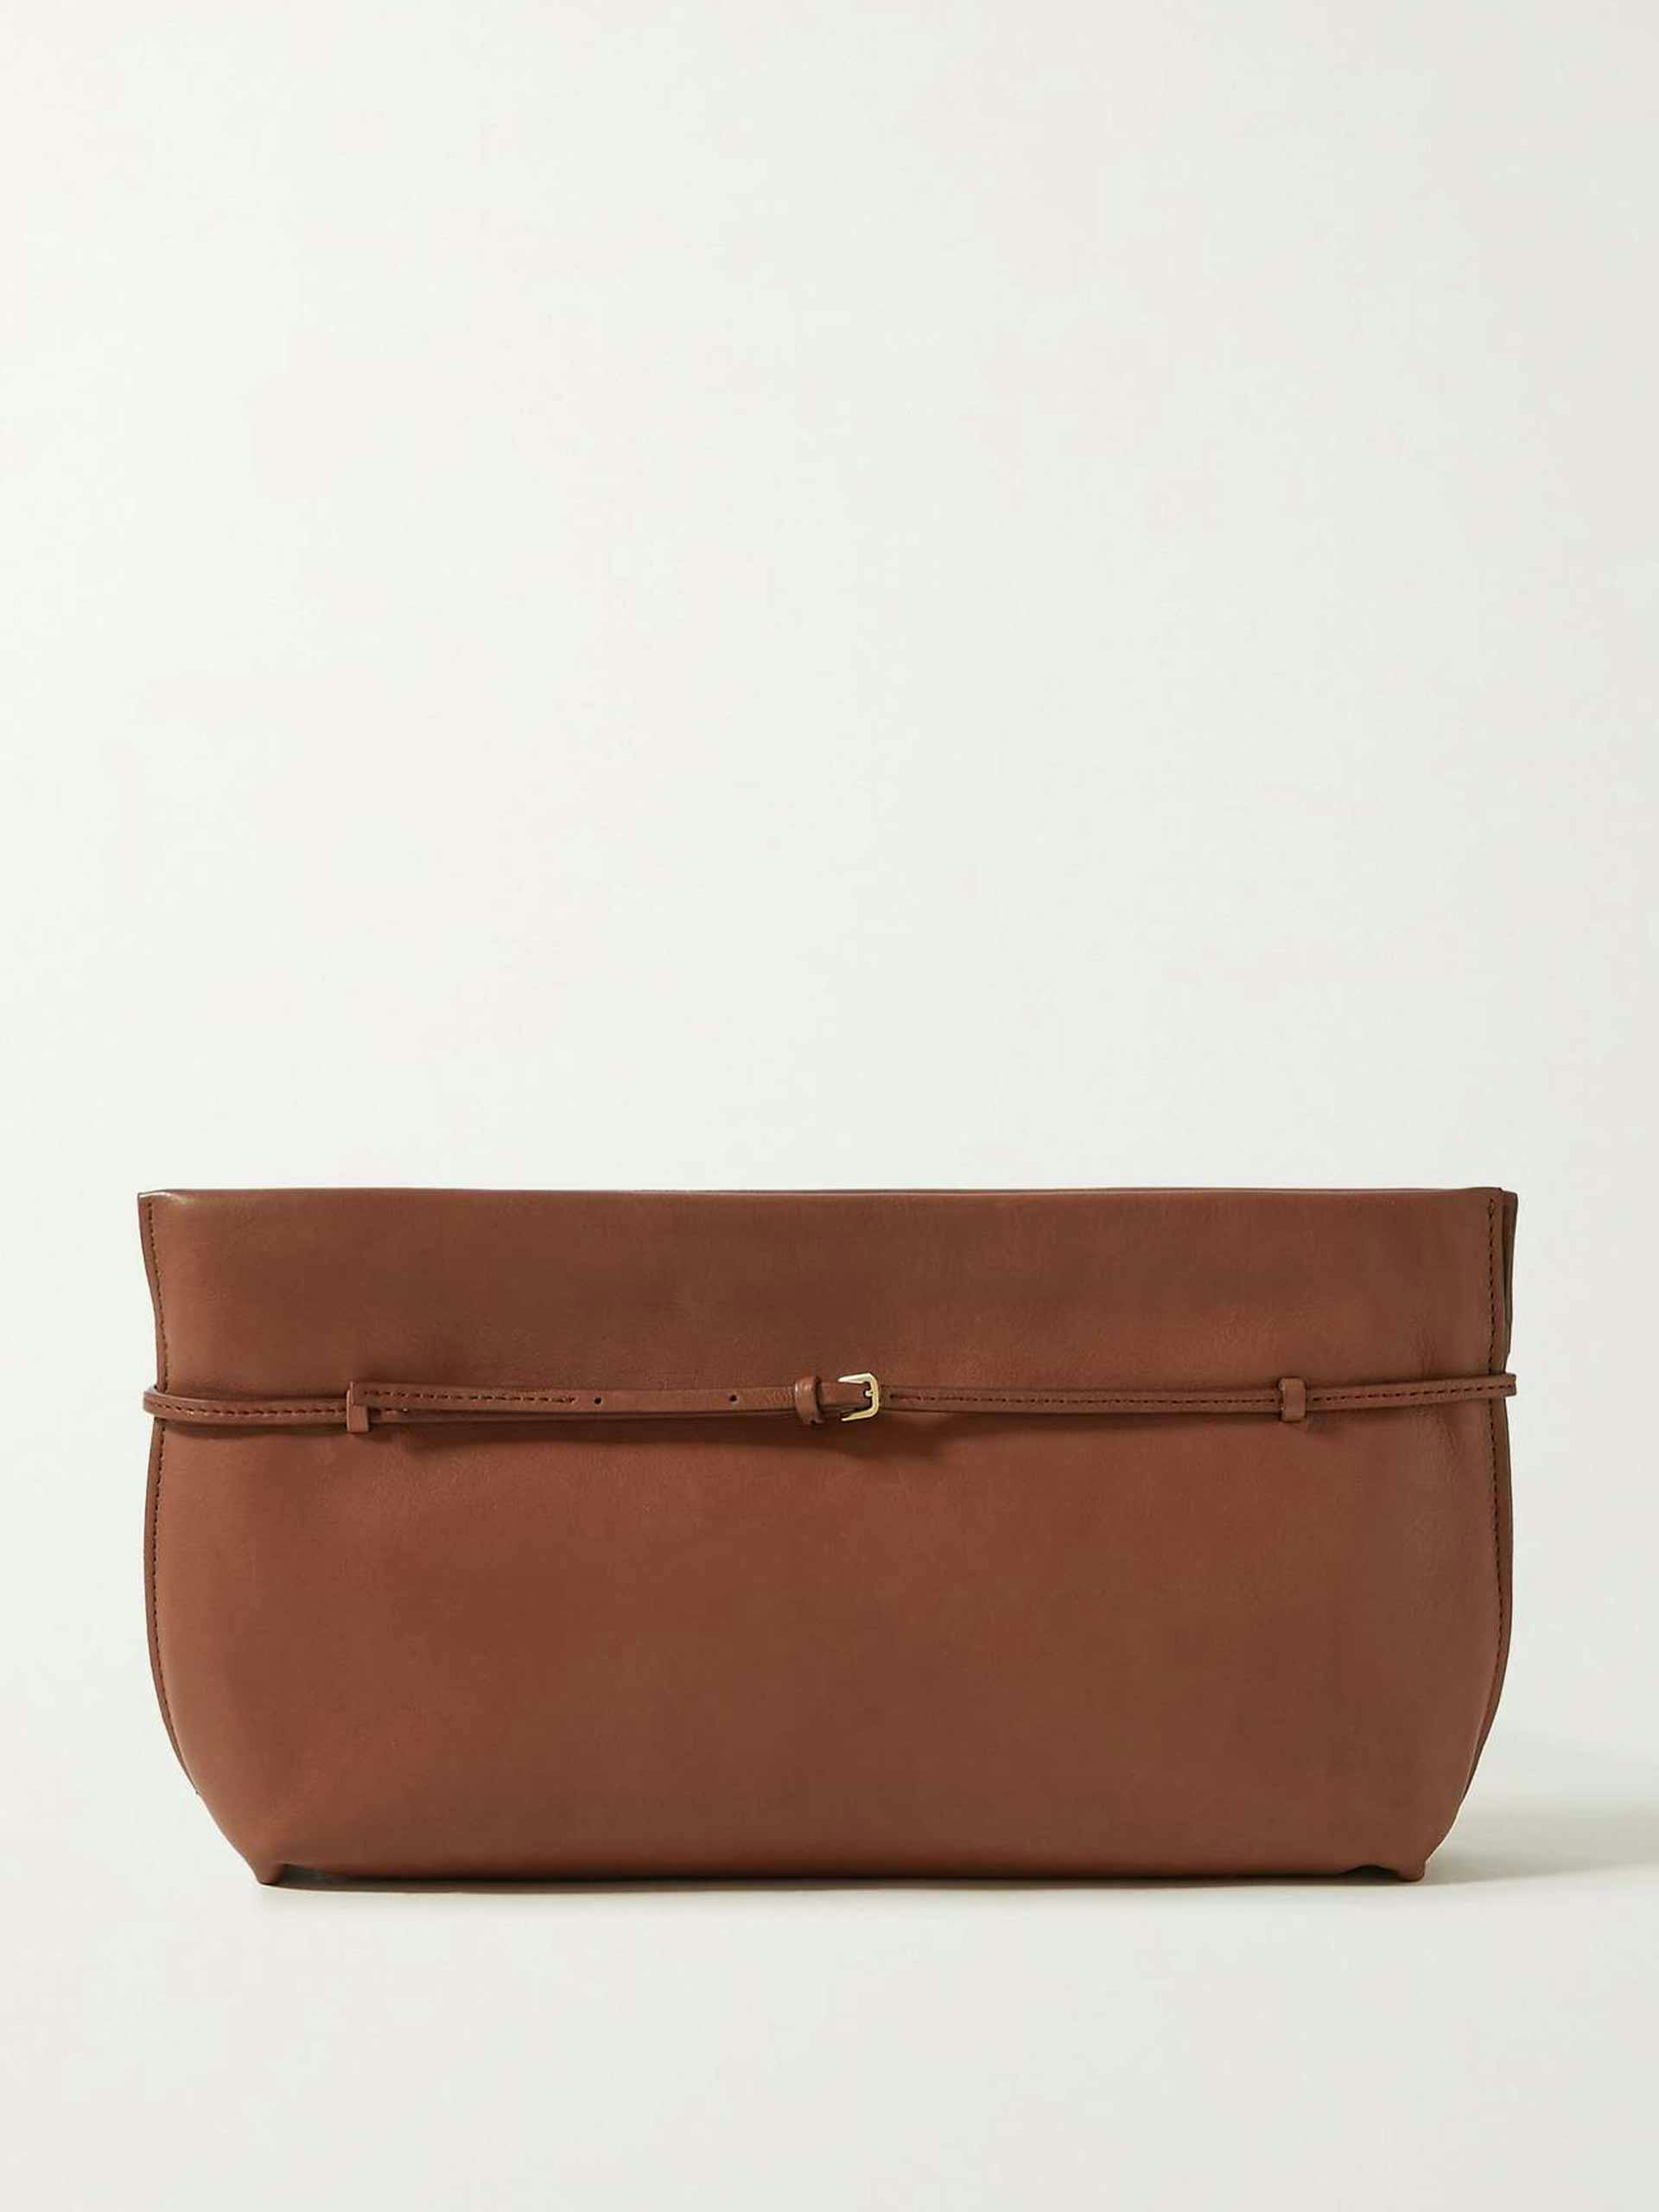 Brown leather clutch